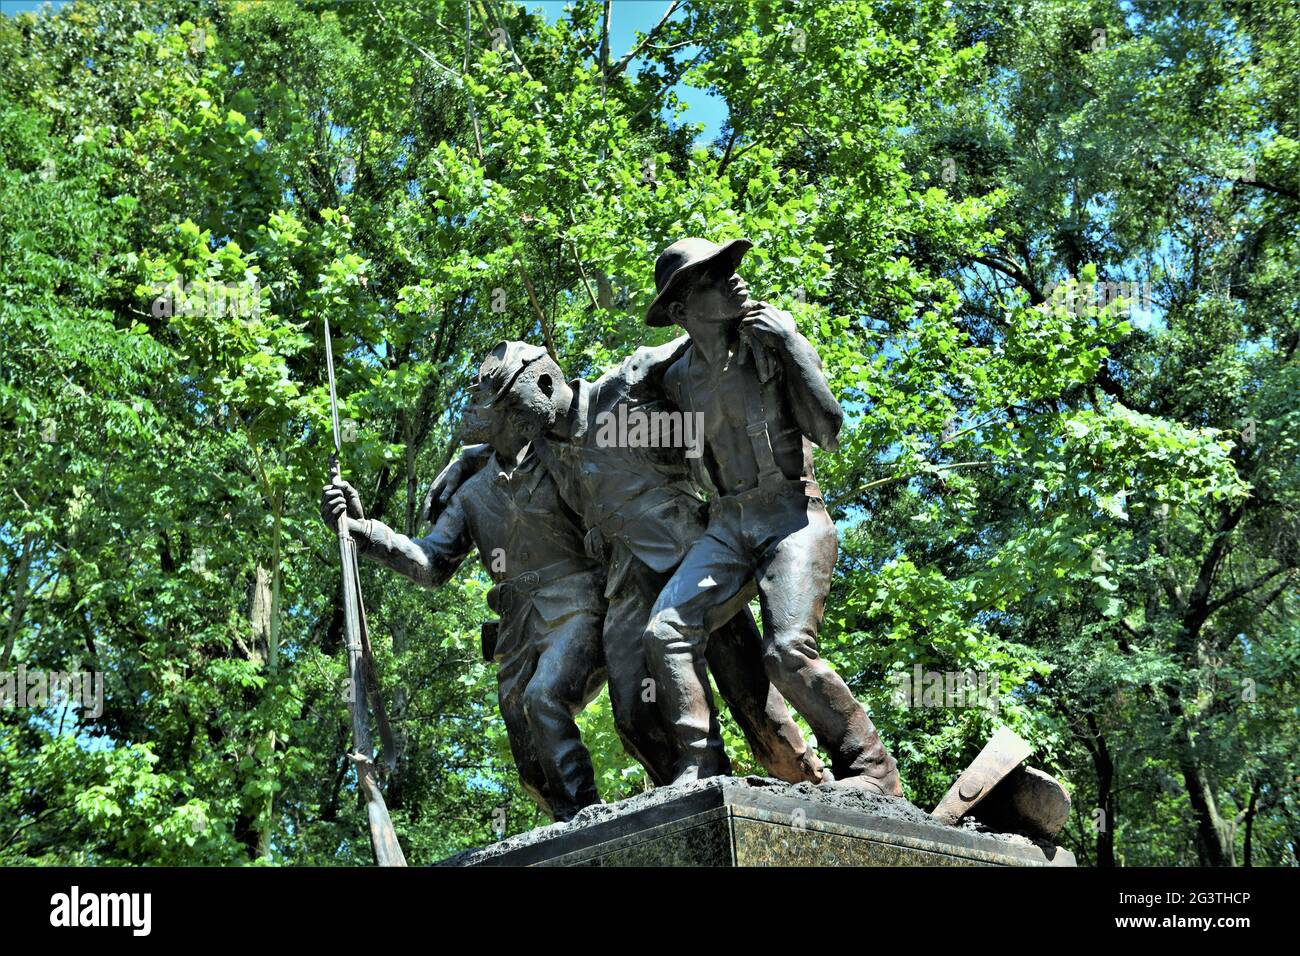 Monument in honor of the 1st and 3rd Mississippi Infantry Regiments in the Vicksburg National Military Park. Stock Photo